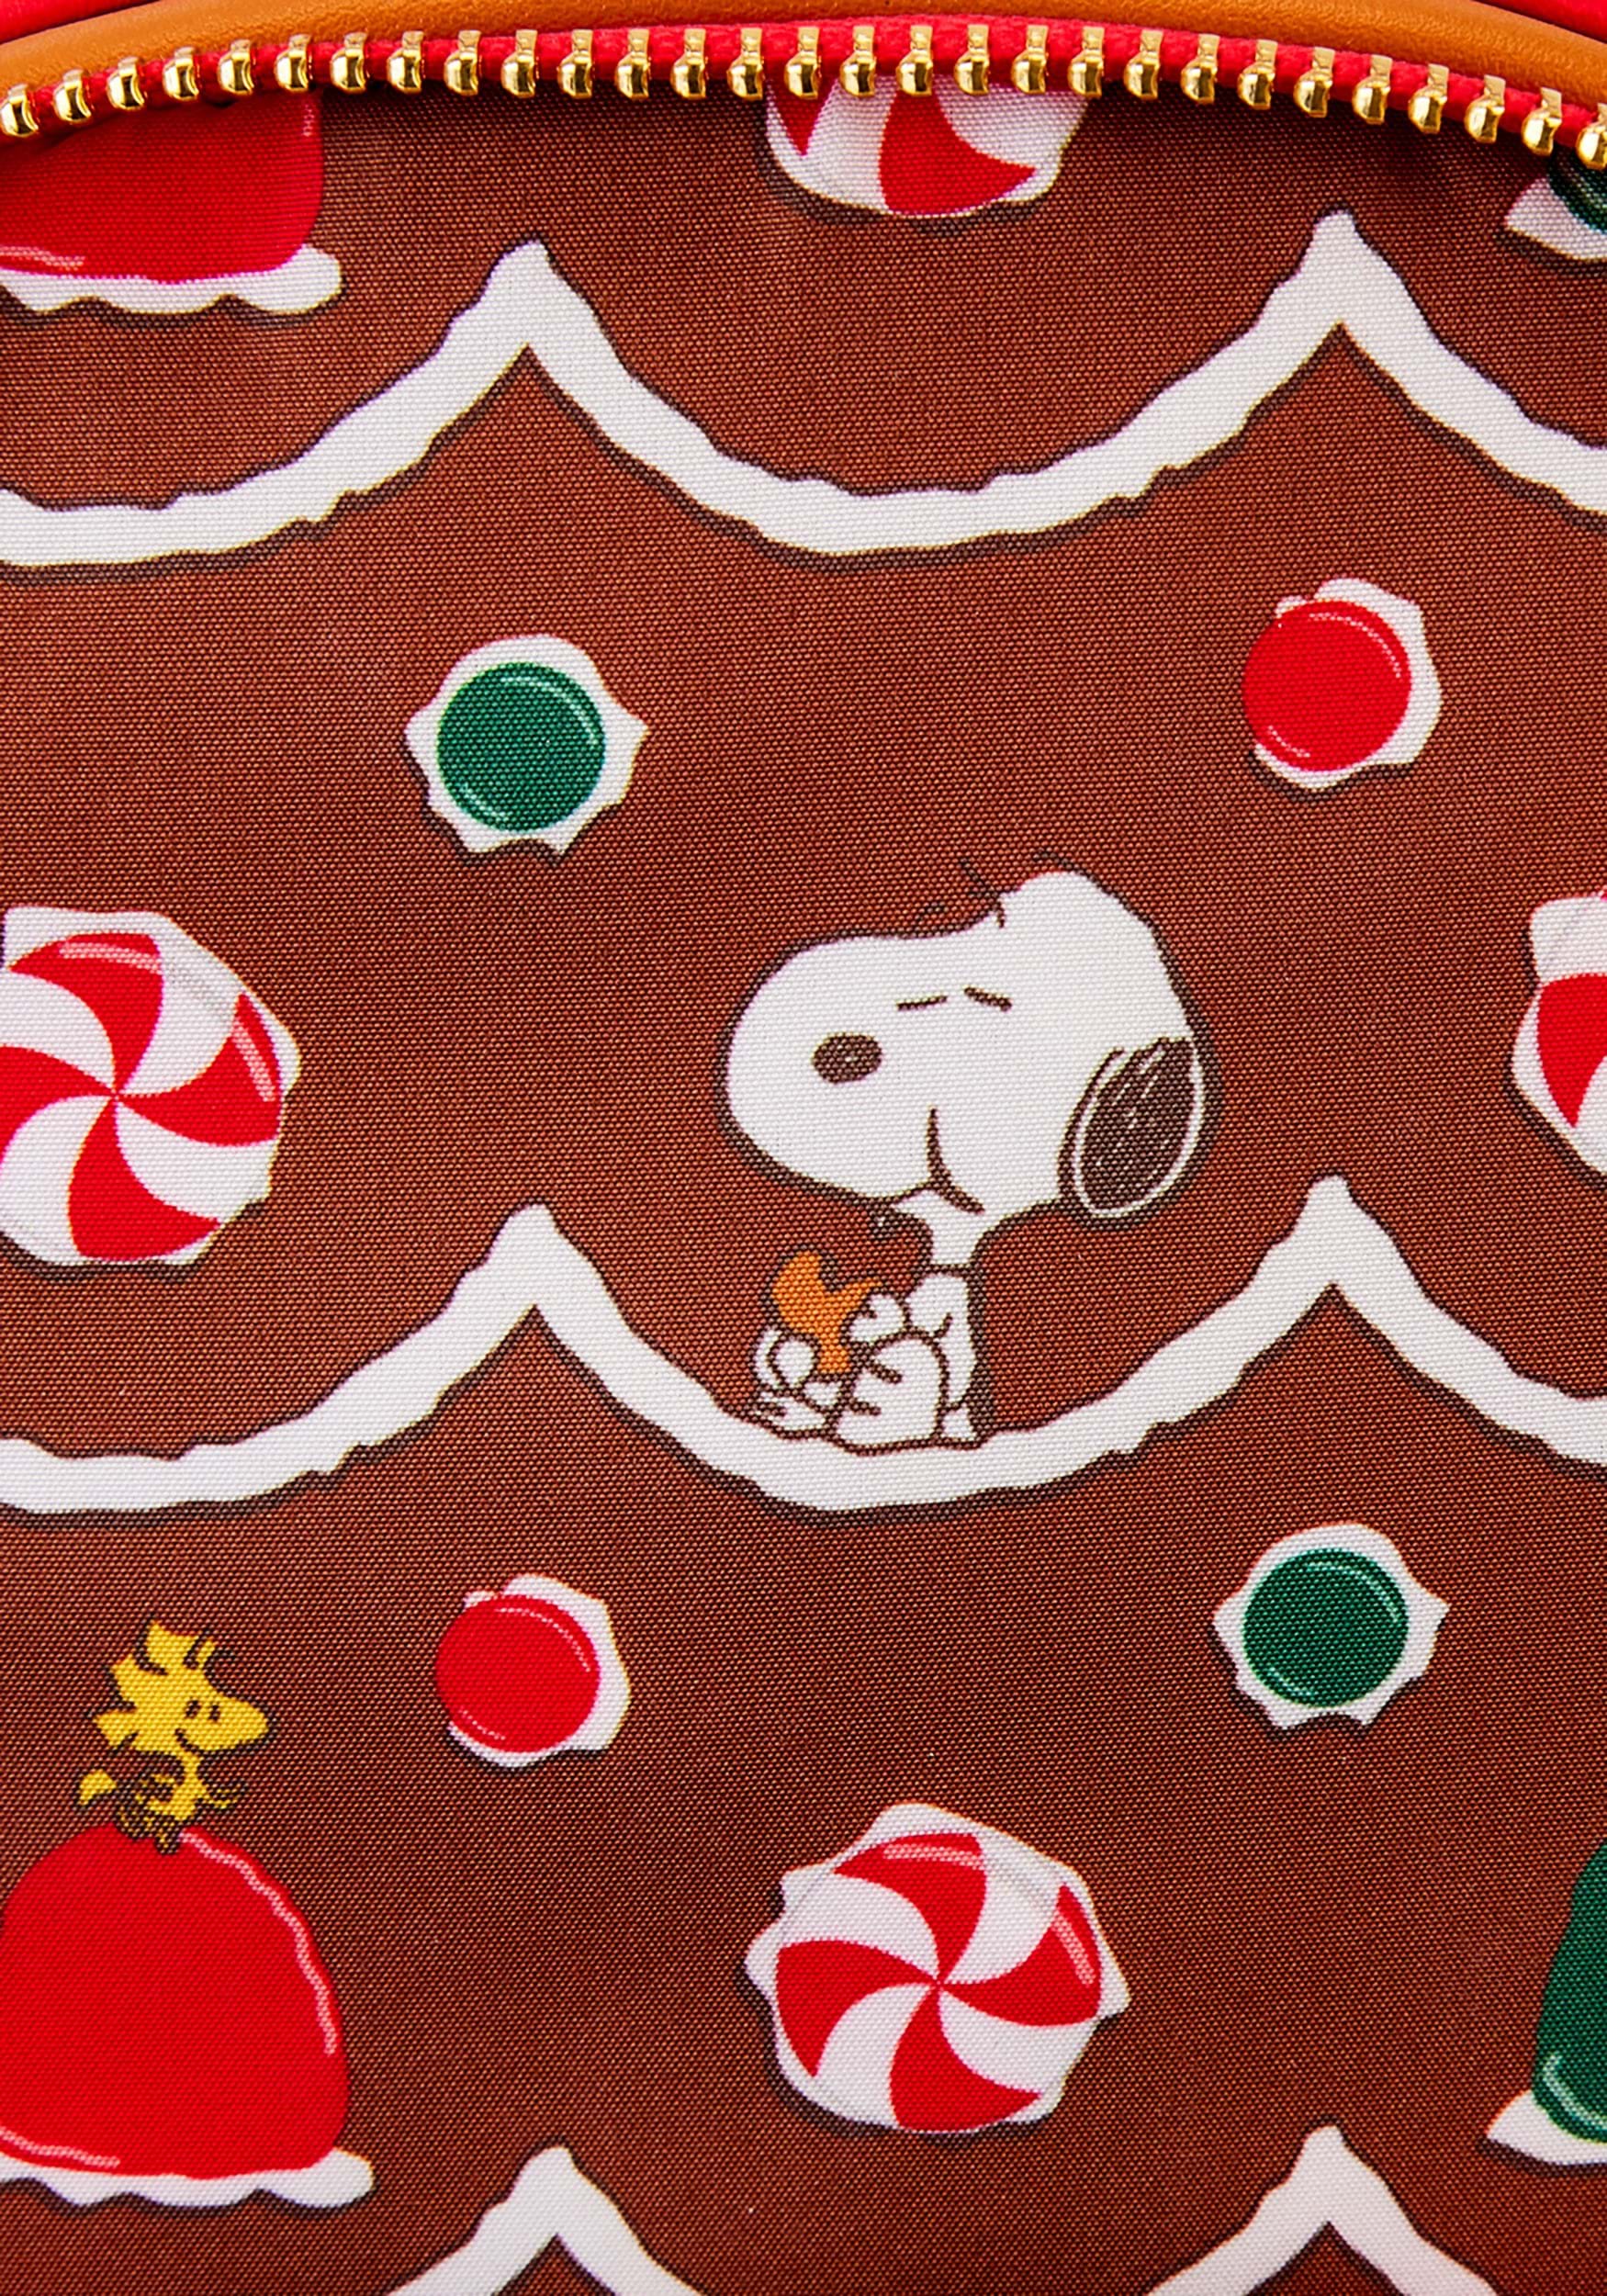 Peanuts Snoopy Gingerbread House Loungefly Mini Backpack , Loungefly Peanuts